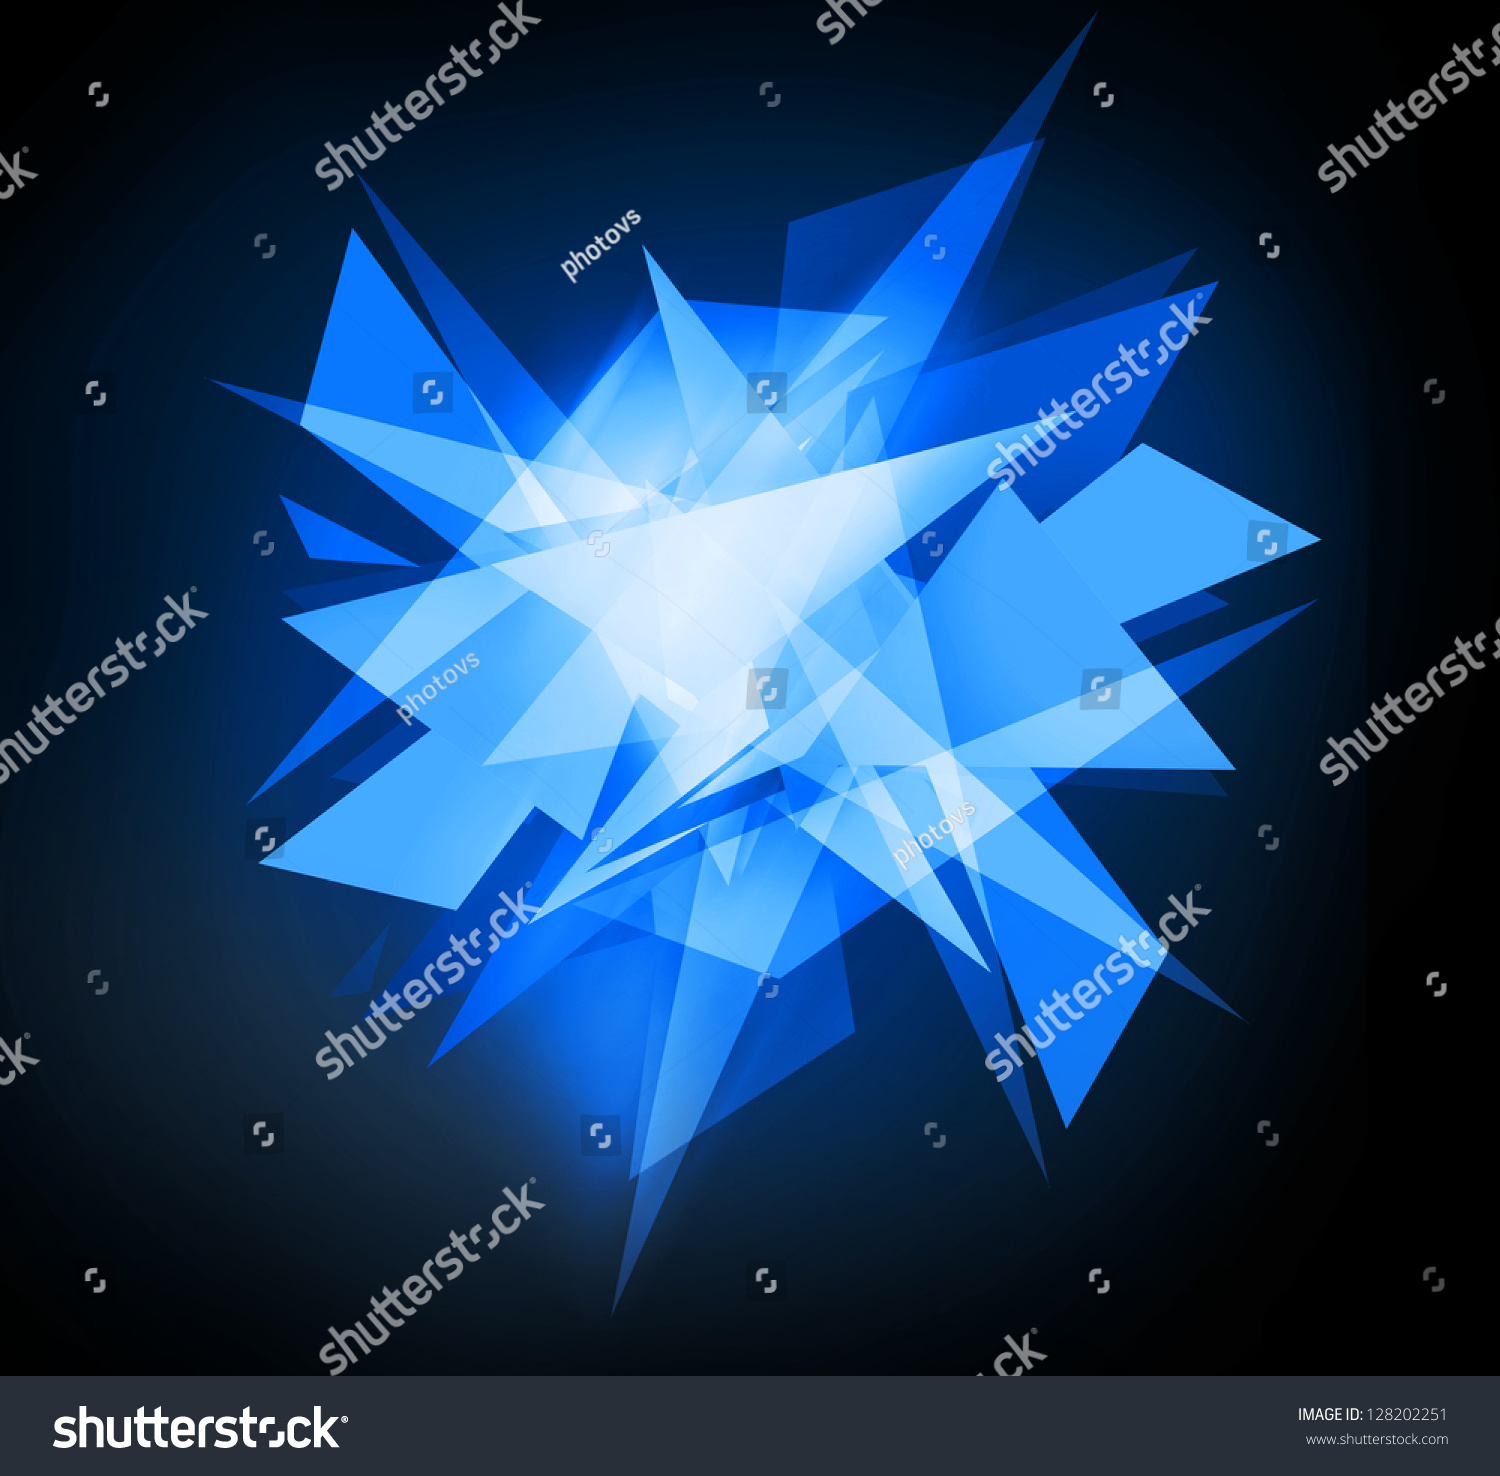 Abstract Future Graphic Background Stock Photo 128202251 : Shutterstock